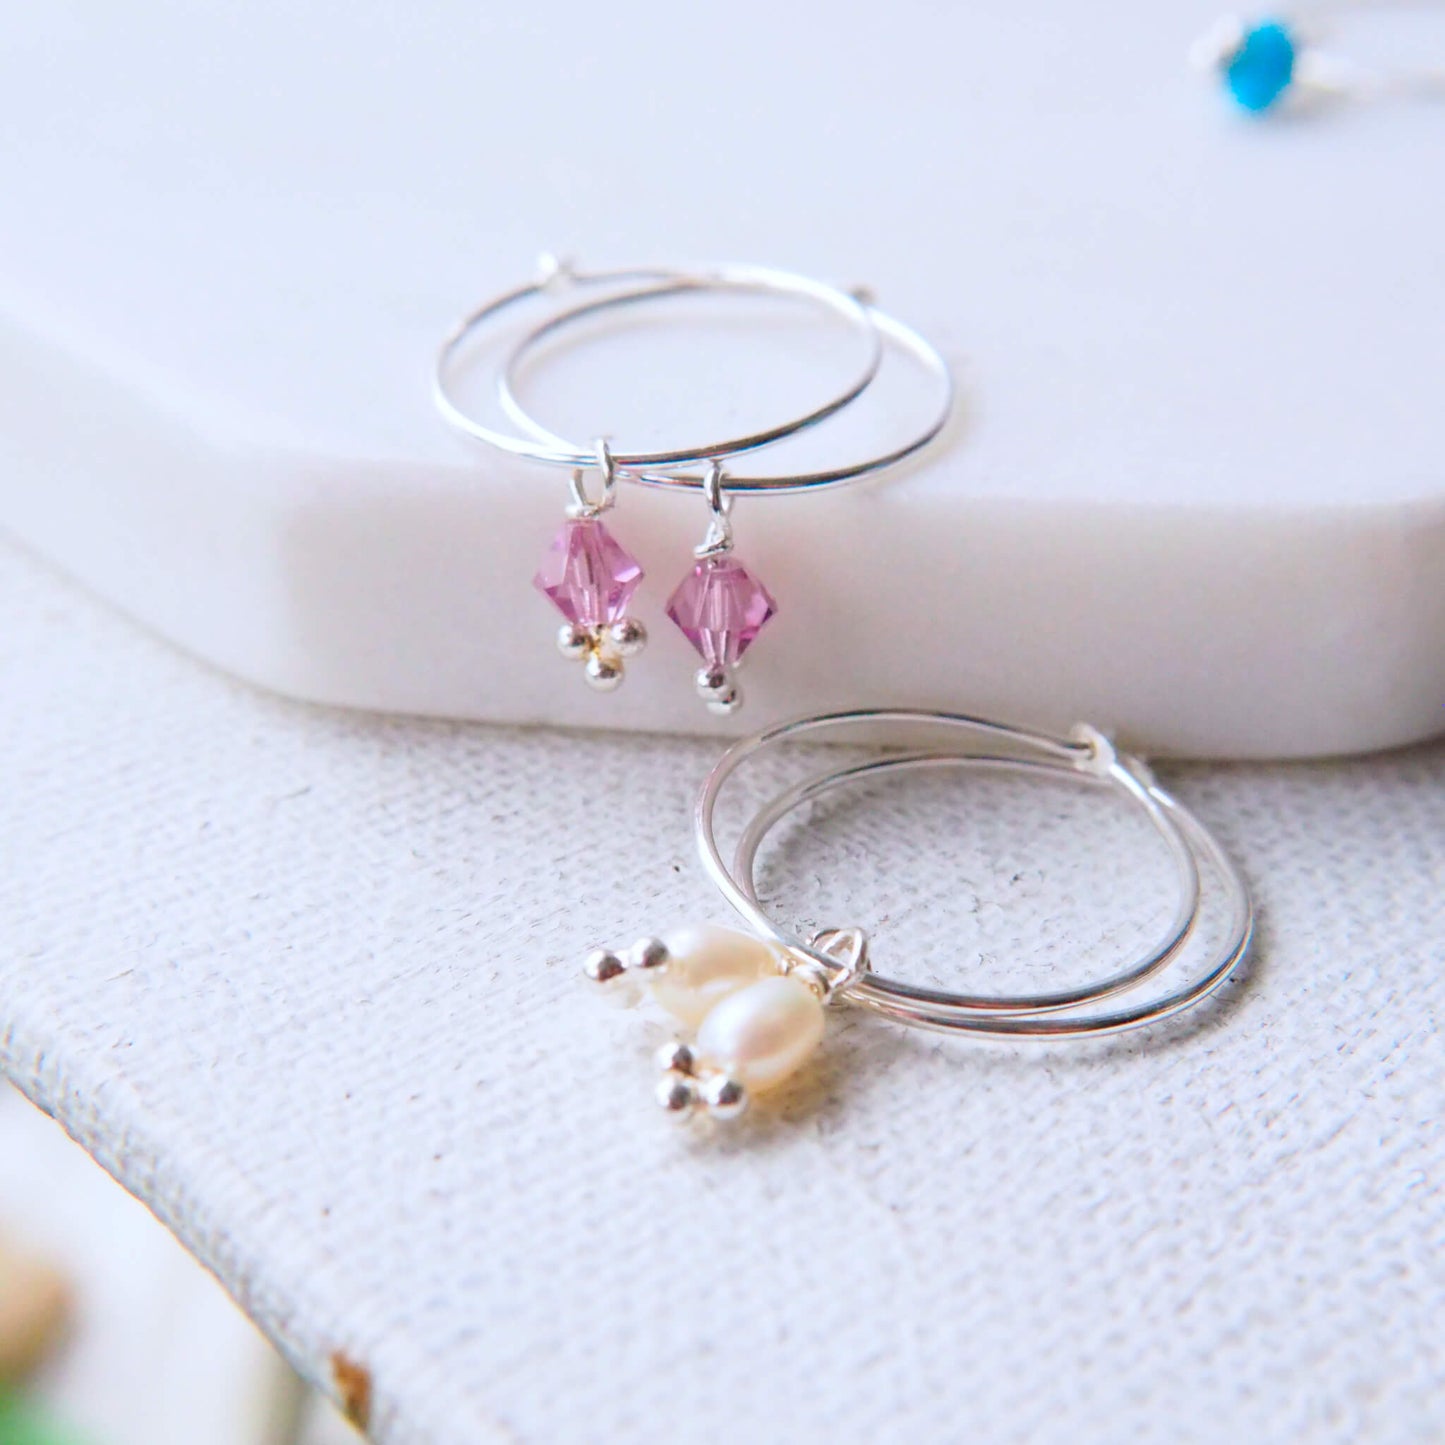 Pearl and Alexandrite birthstone Hoops for June. Small dusky pink crystal and freshwater pearl charm drops on a thin sterling silver wire hoop. Handmade in Scotland by maram jewellery.